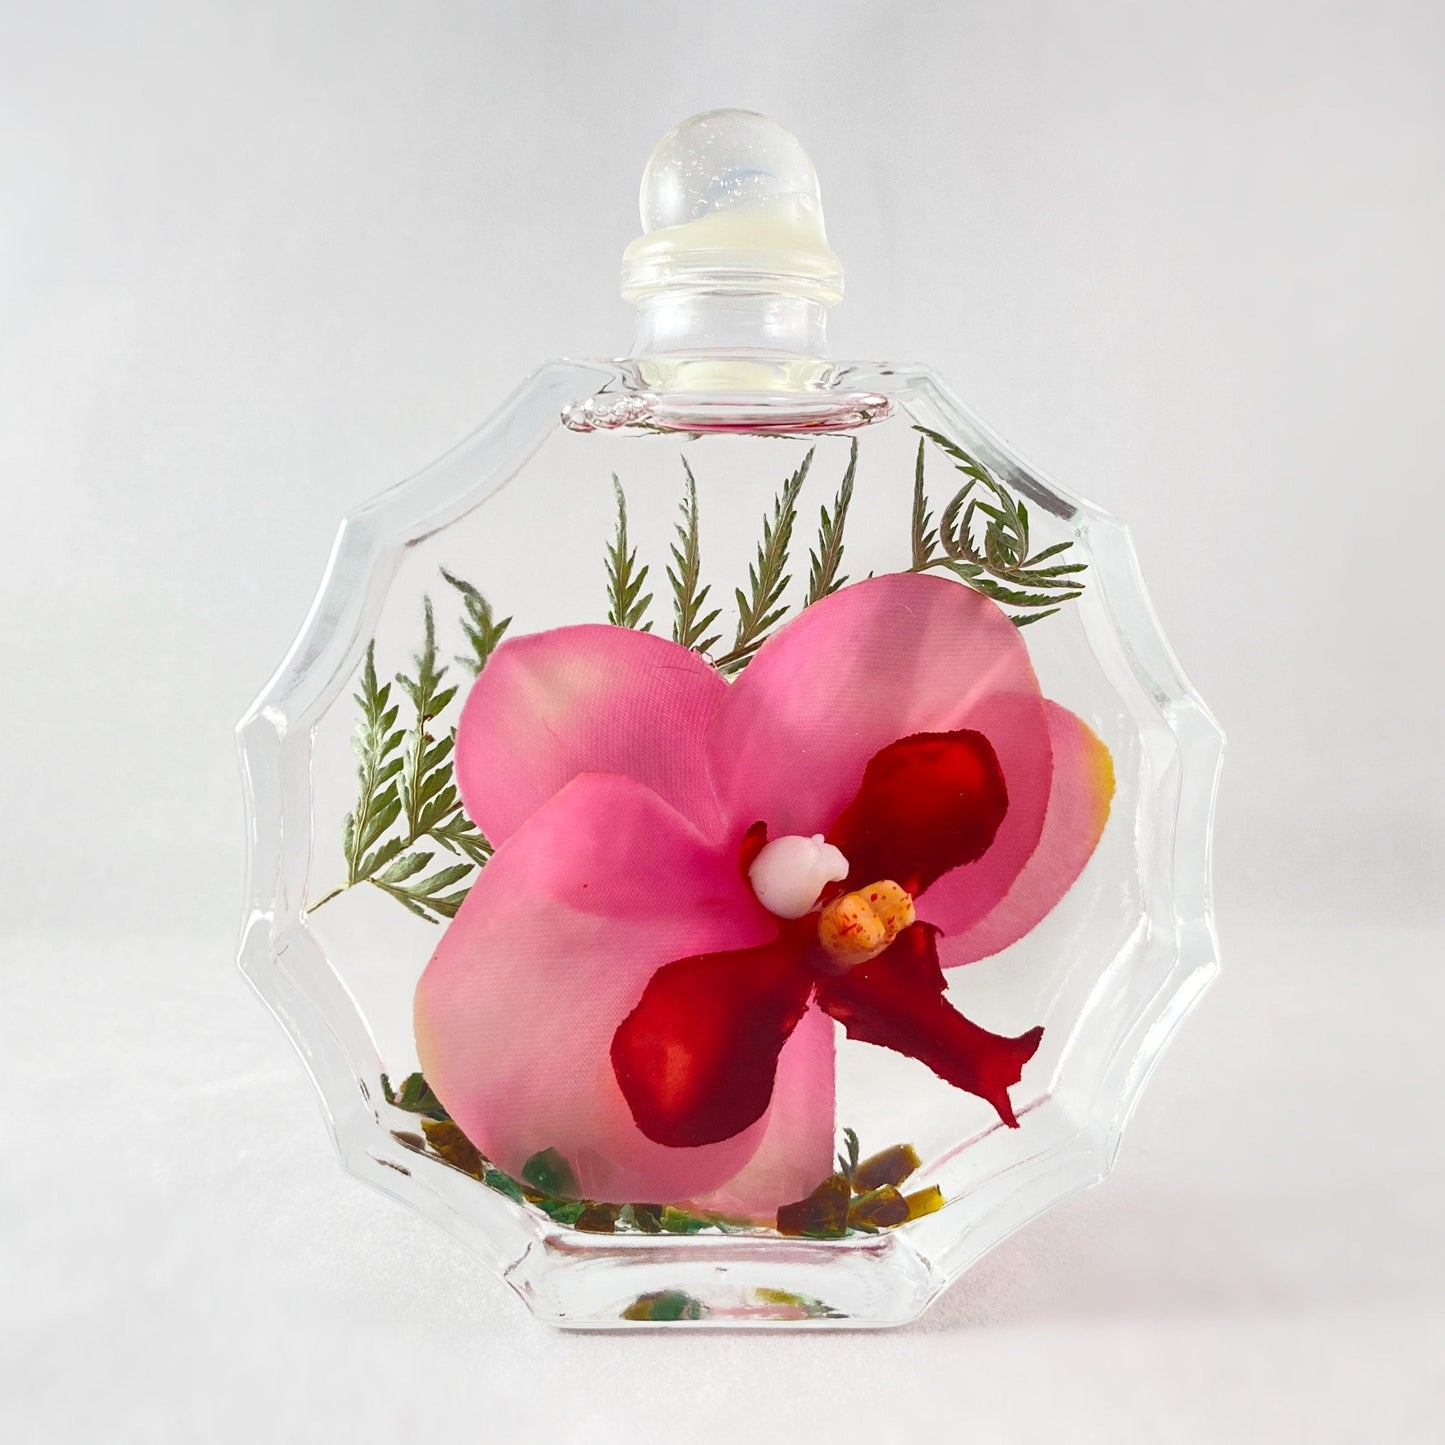 Liquid Candle with Pink Orchid, Small Polygon Liquid Candle/Home Decor - Handmade in USA - Long Burn Time